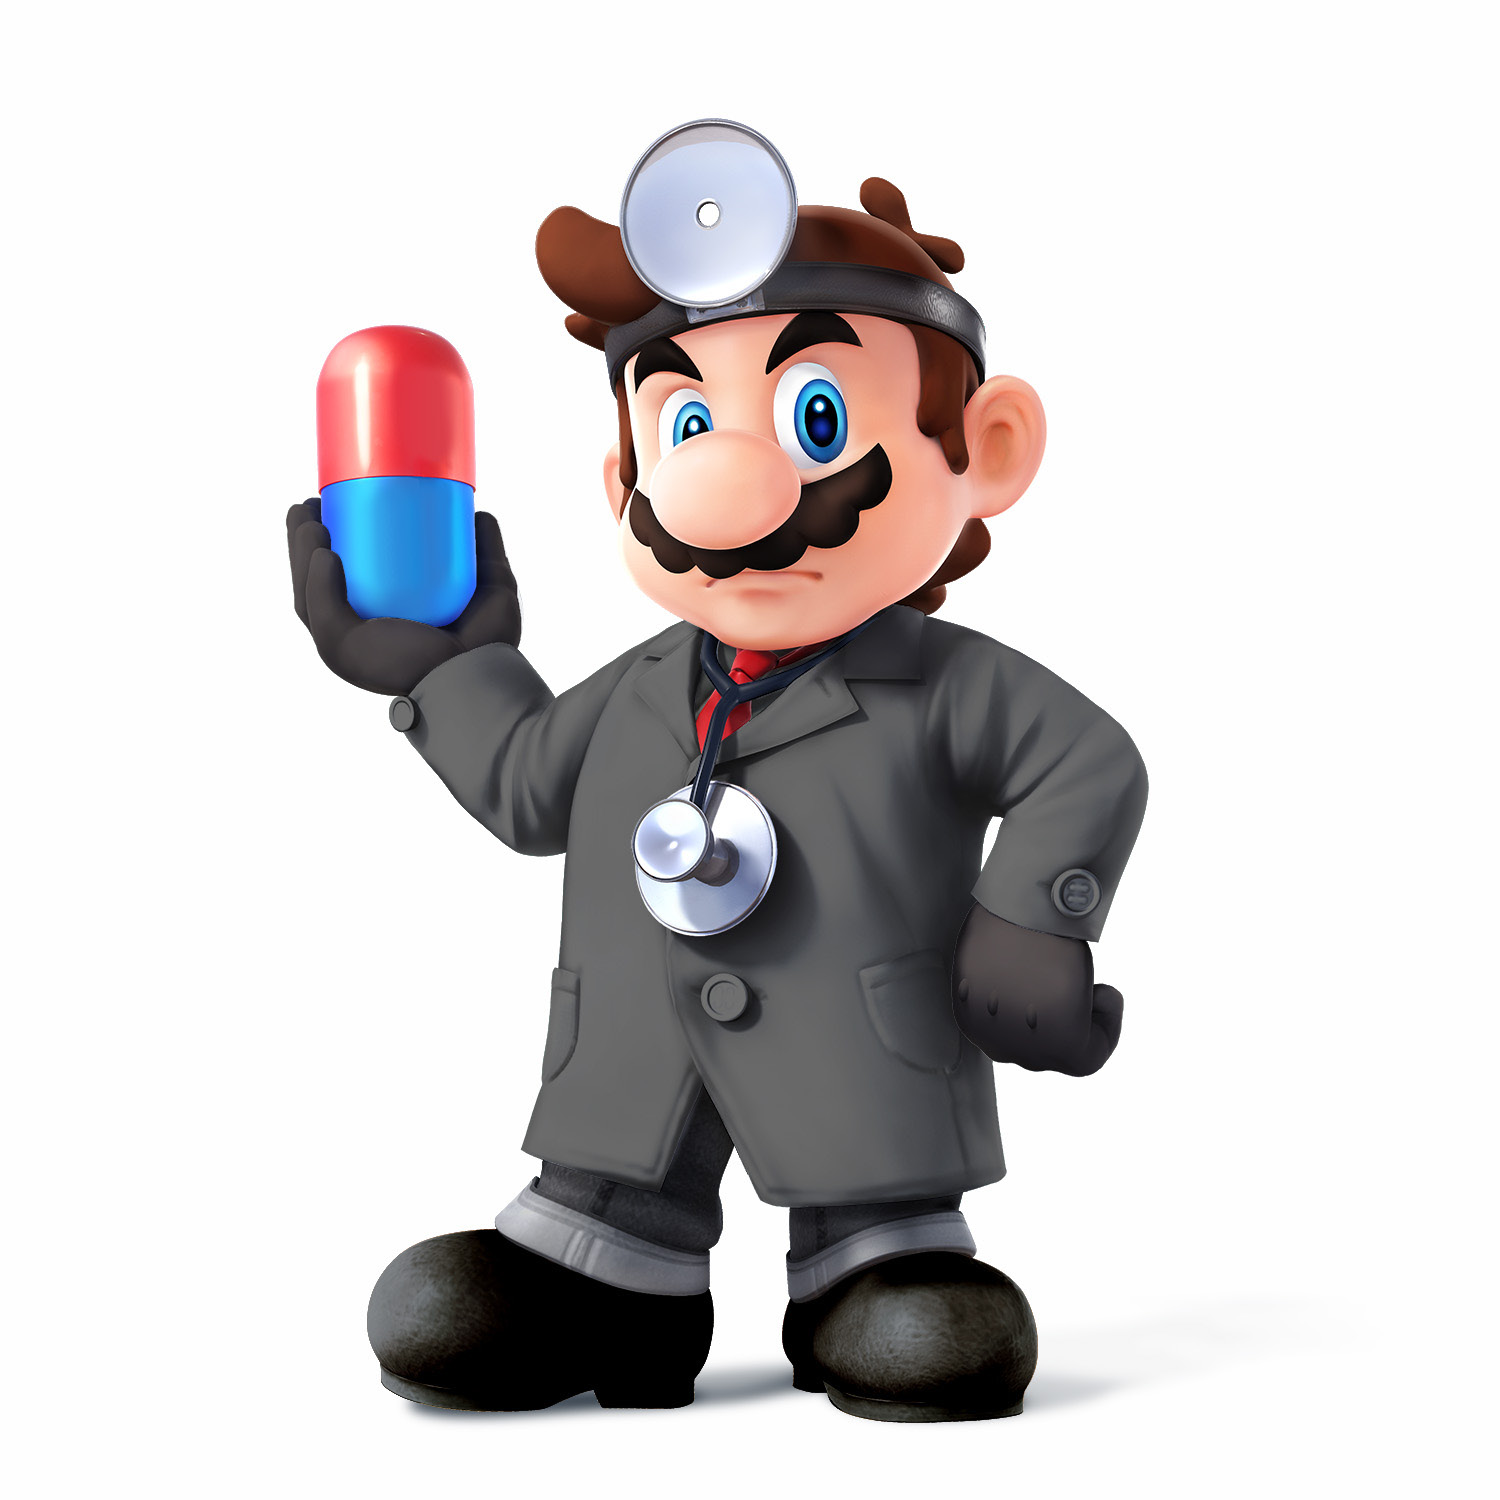 Nice Images Collection: Dr. Mario Desktop Wallpapers